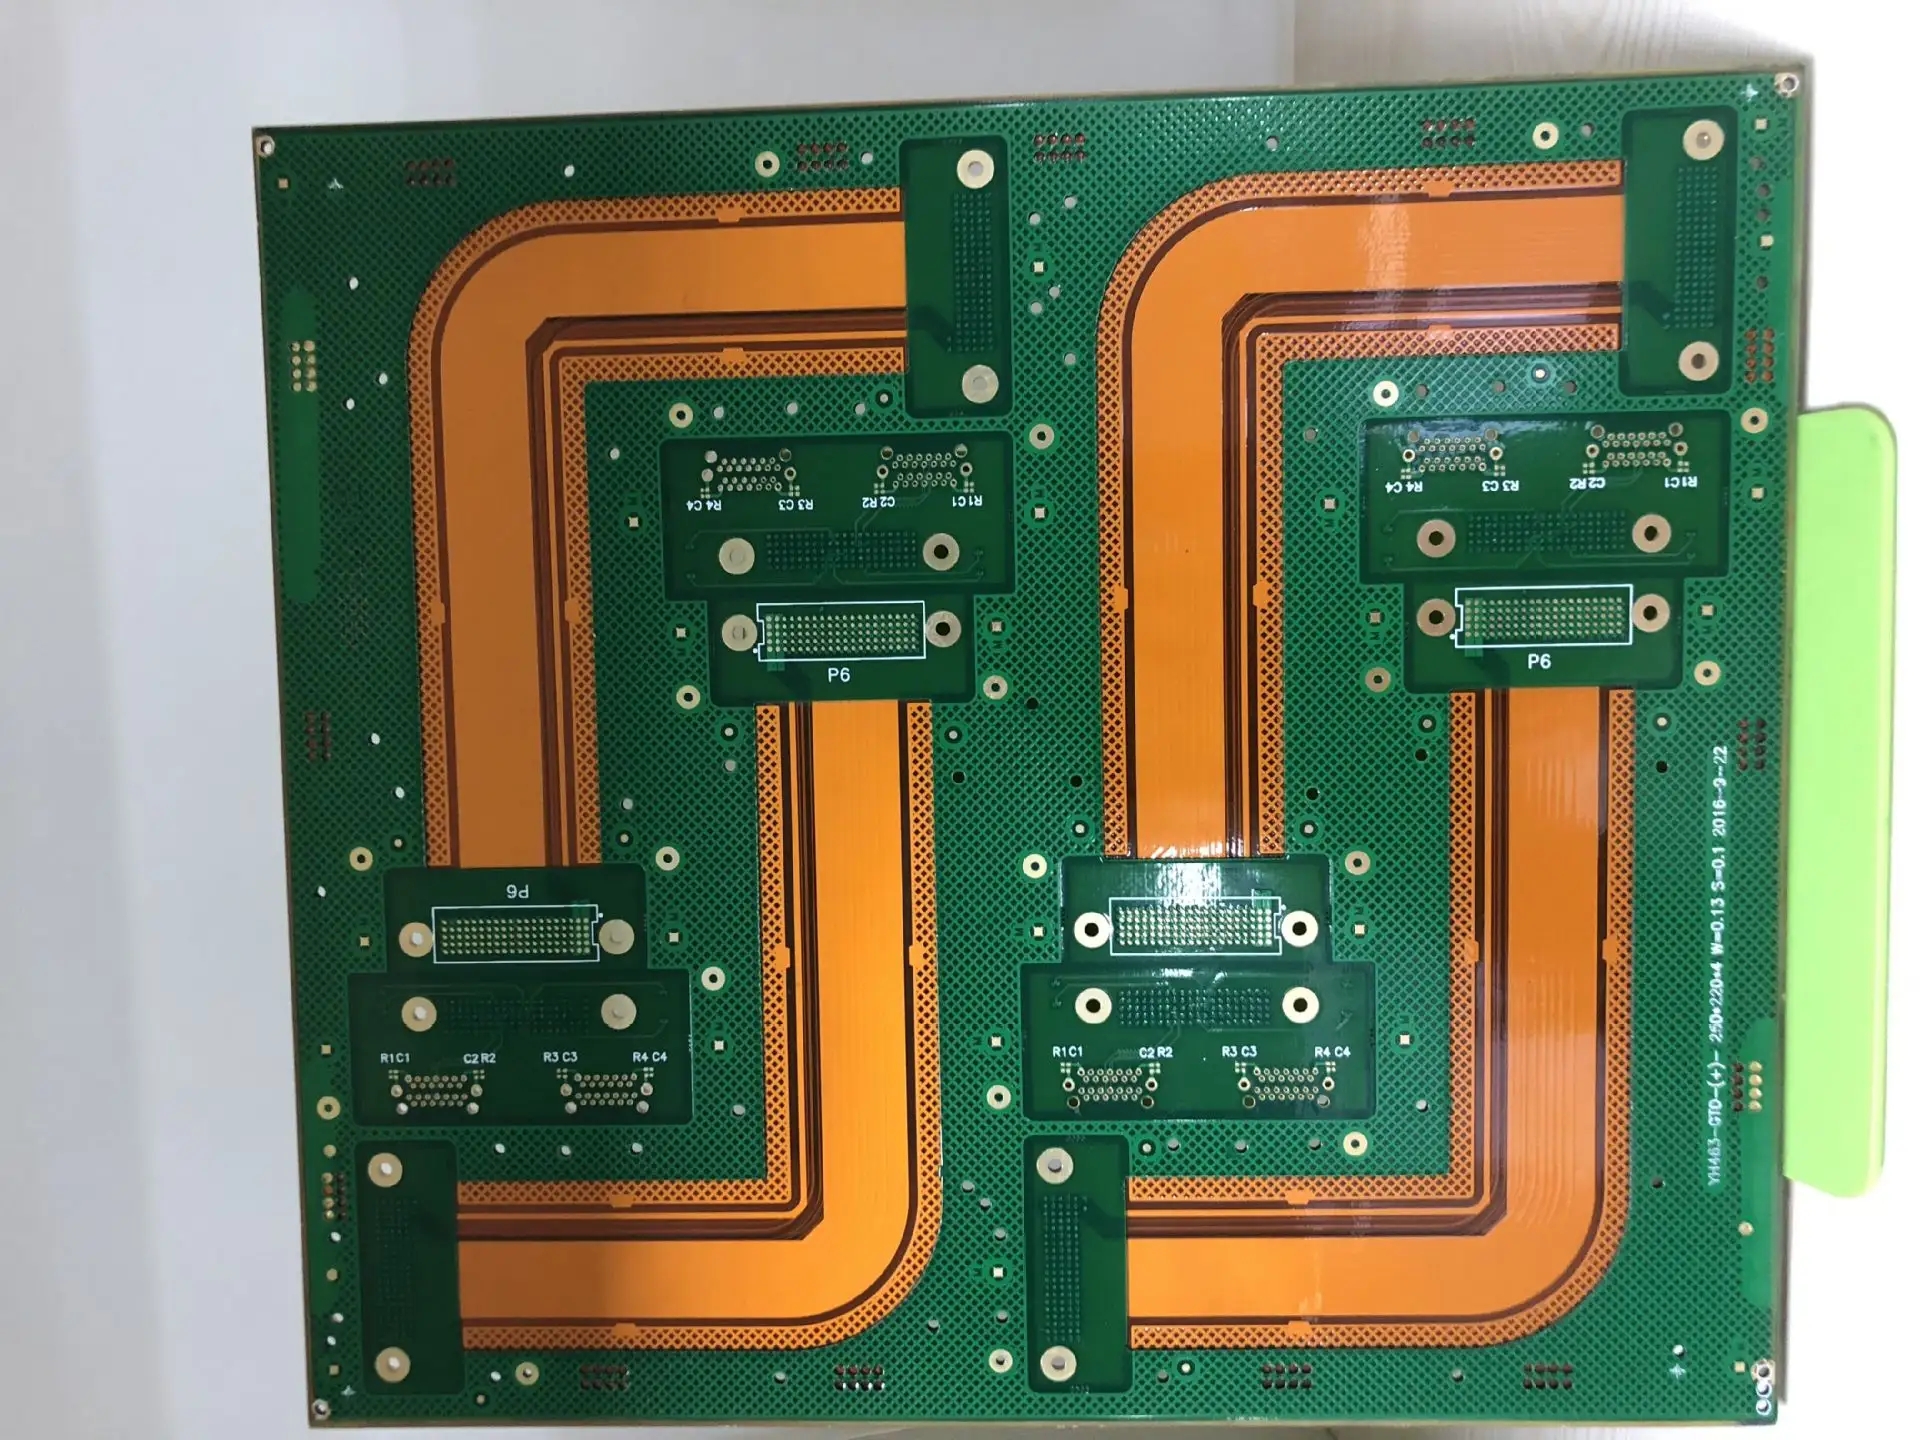 Small editor of electronic factory explains the significance of making PCB into multi-layer